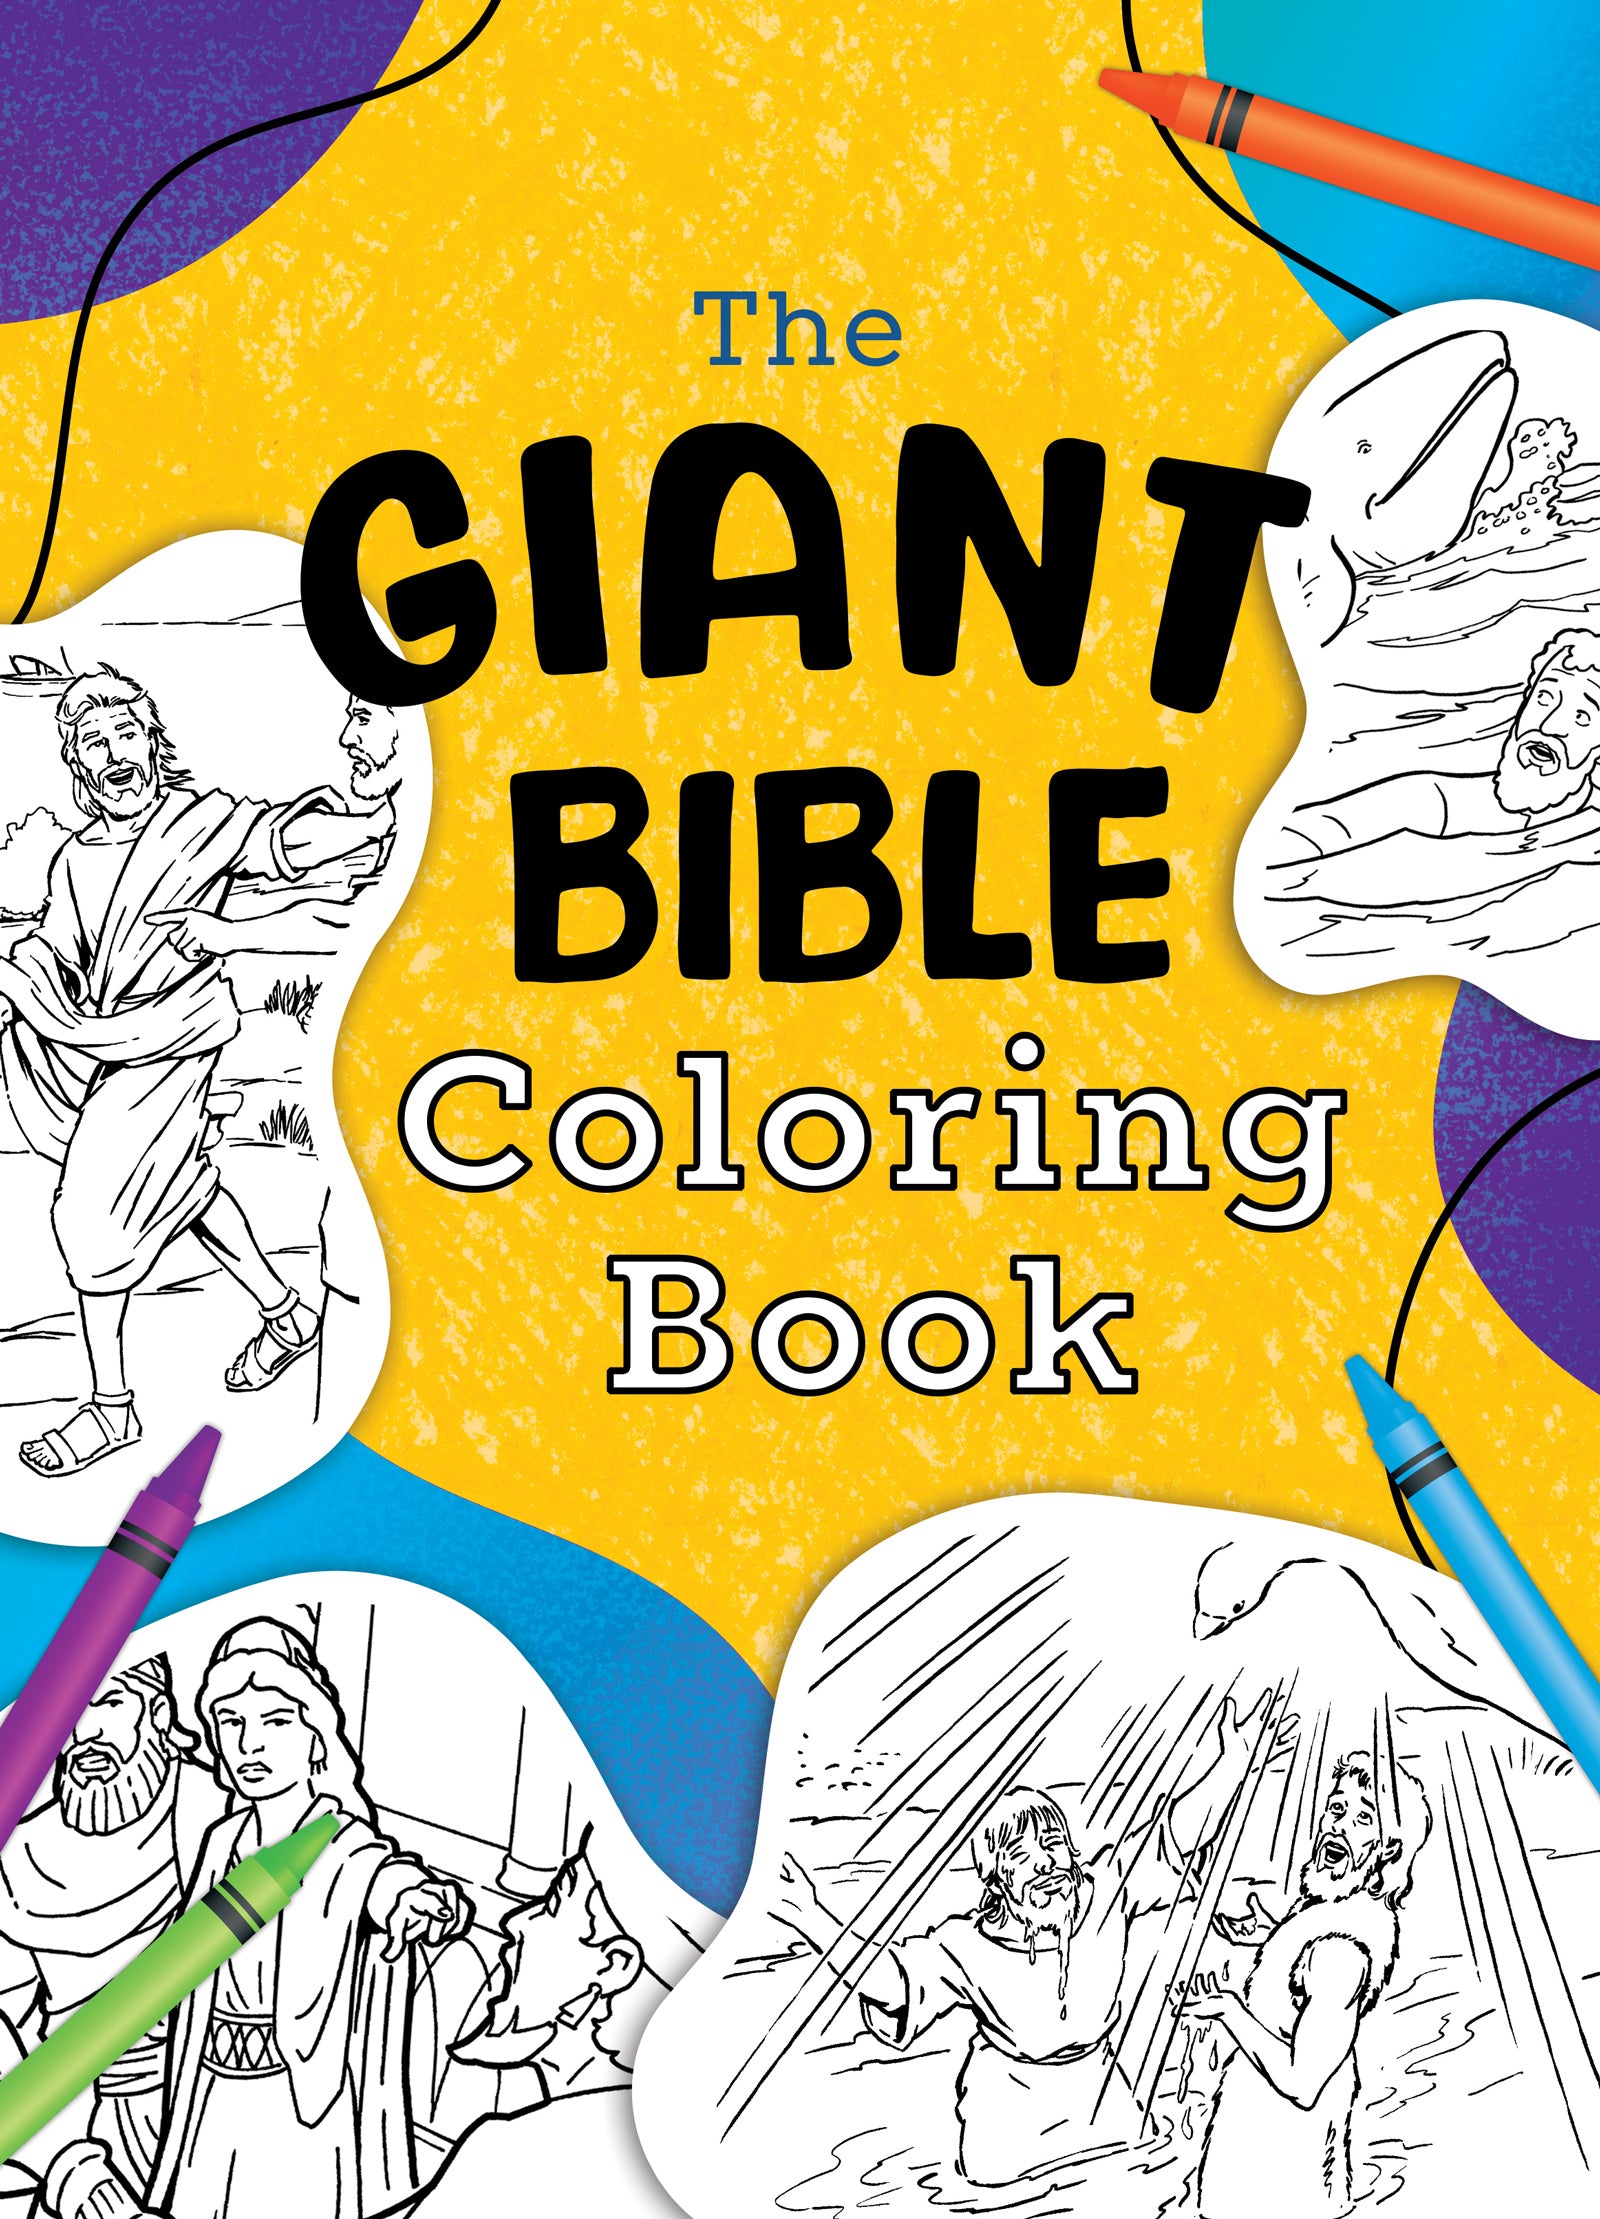 The Giant Bible Coloring Book - The Christian Gift Company